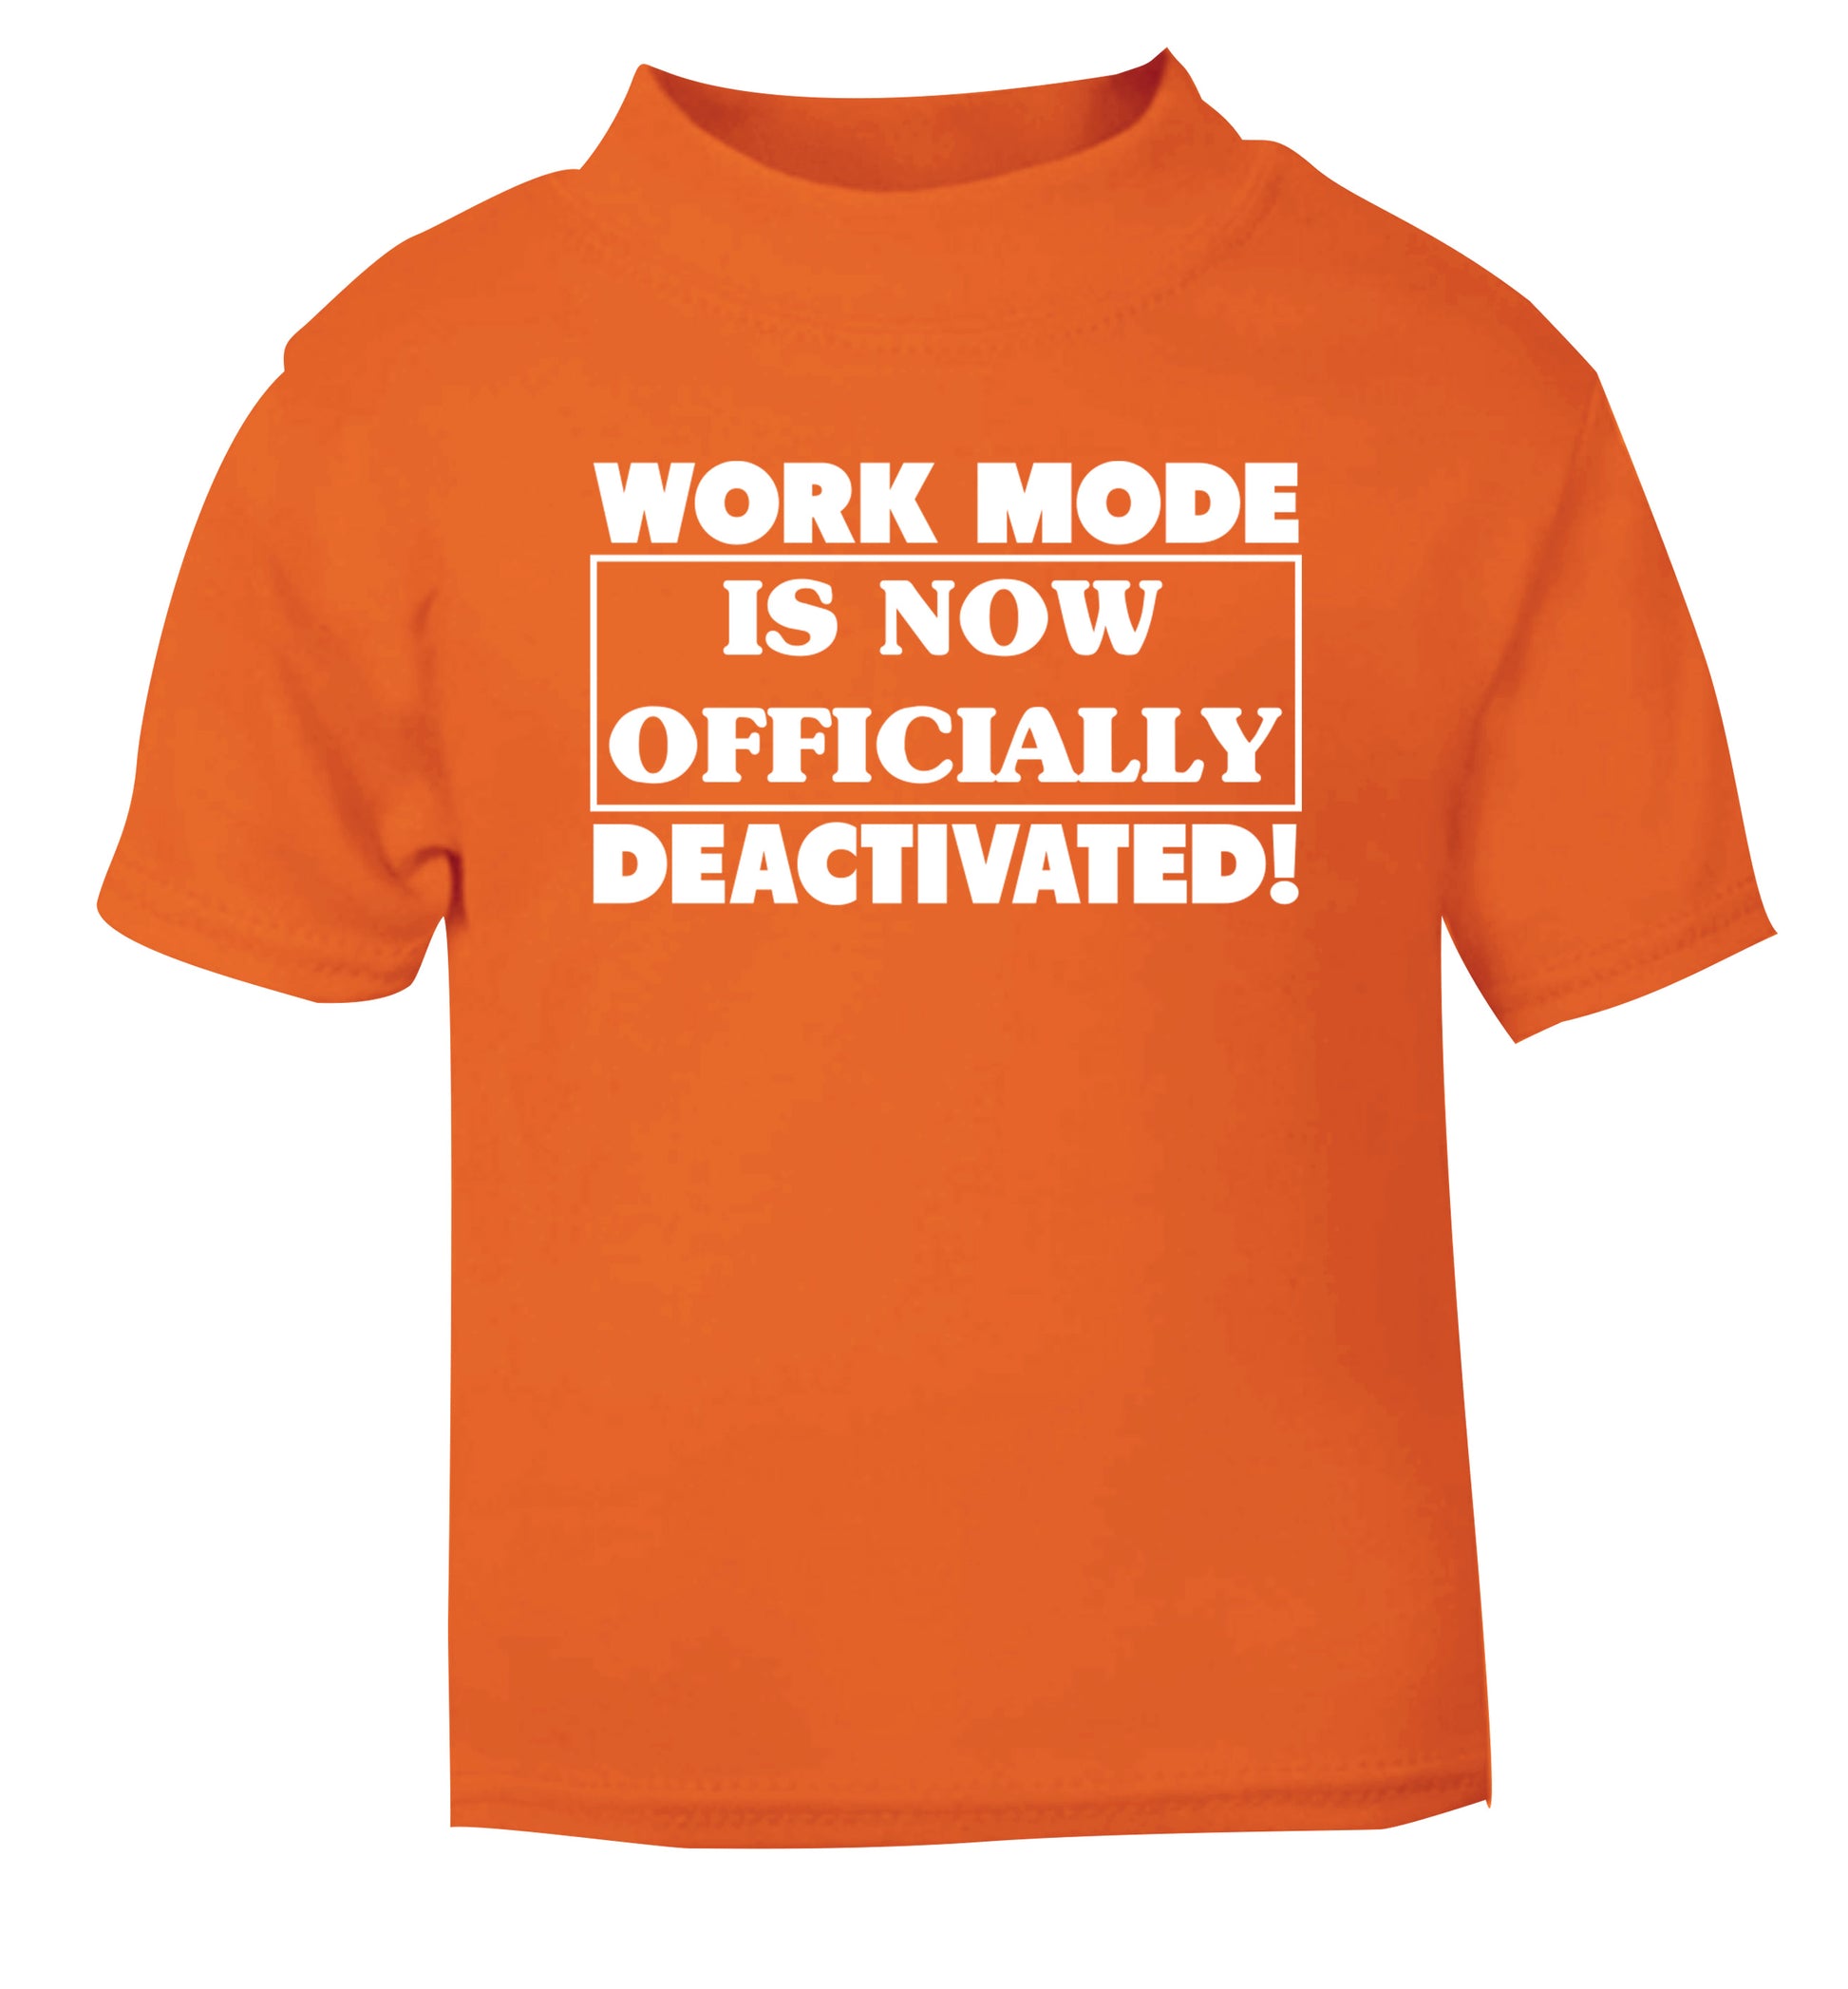 Work mode is now officially deactivated orange Baby Toddler Tshirt 2 Years